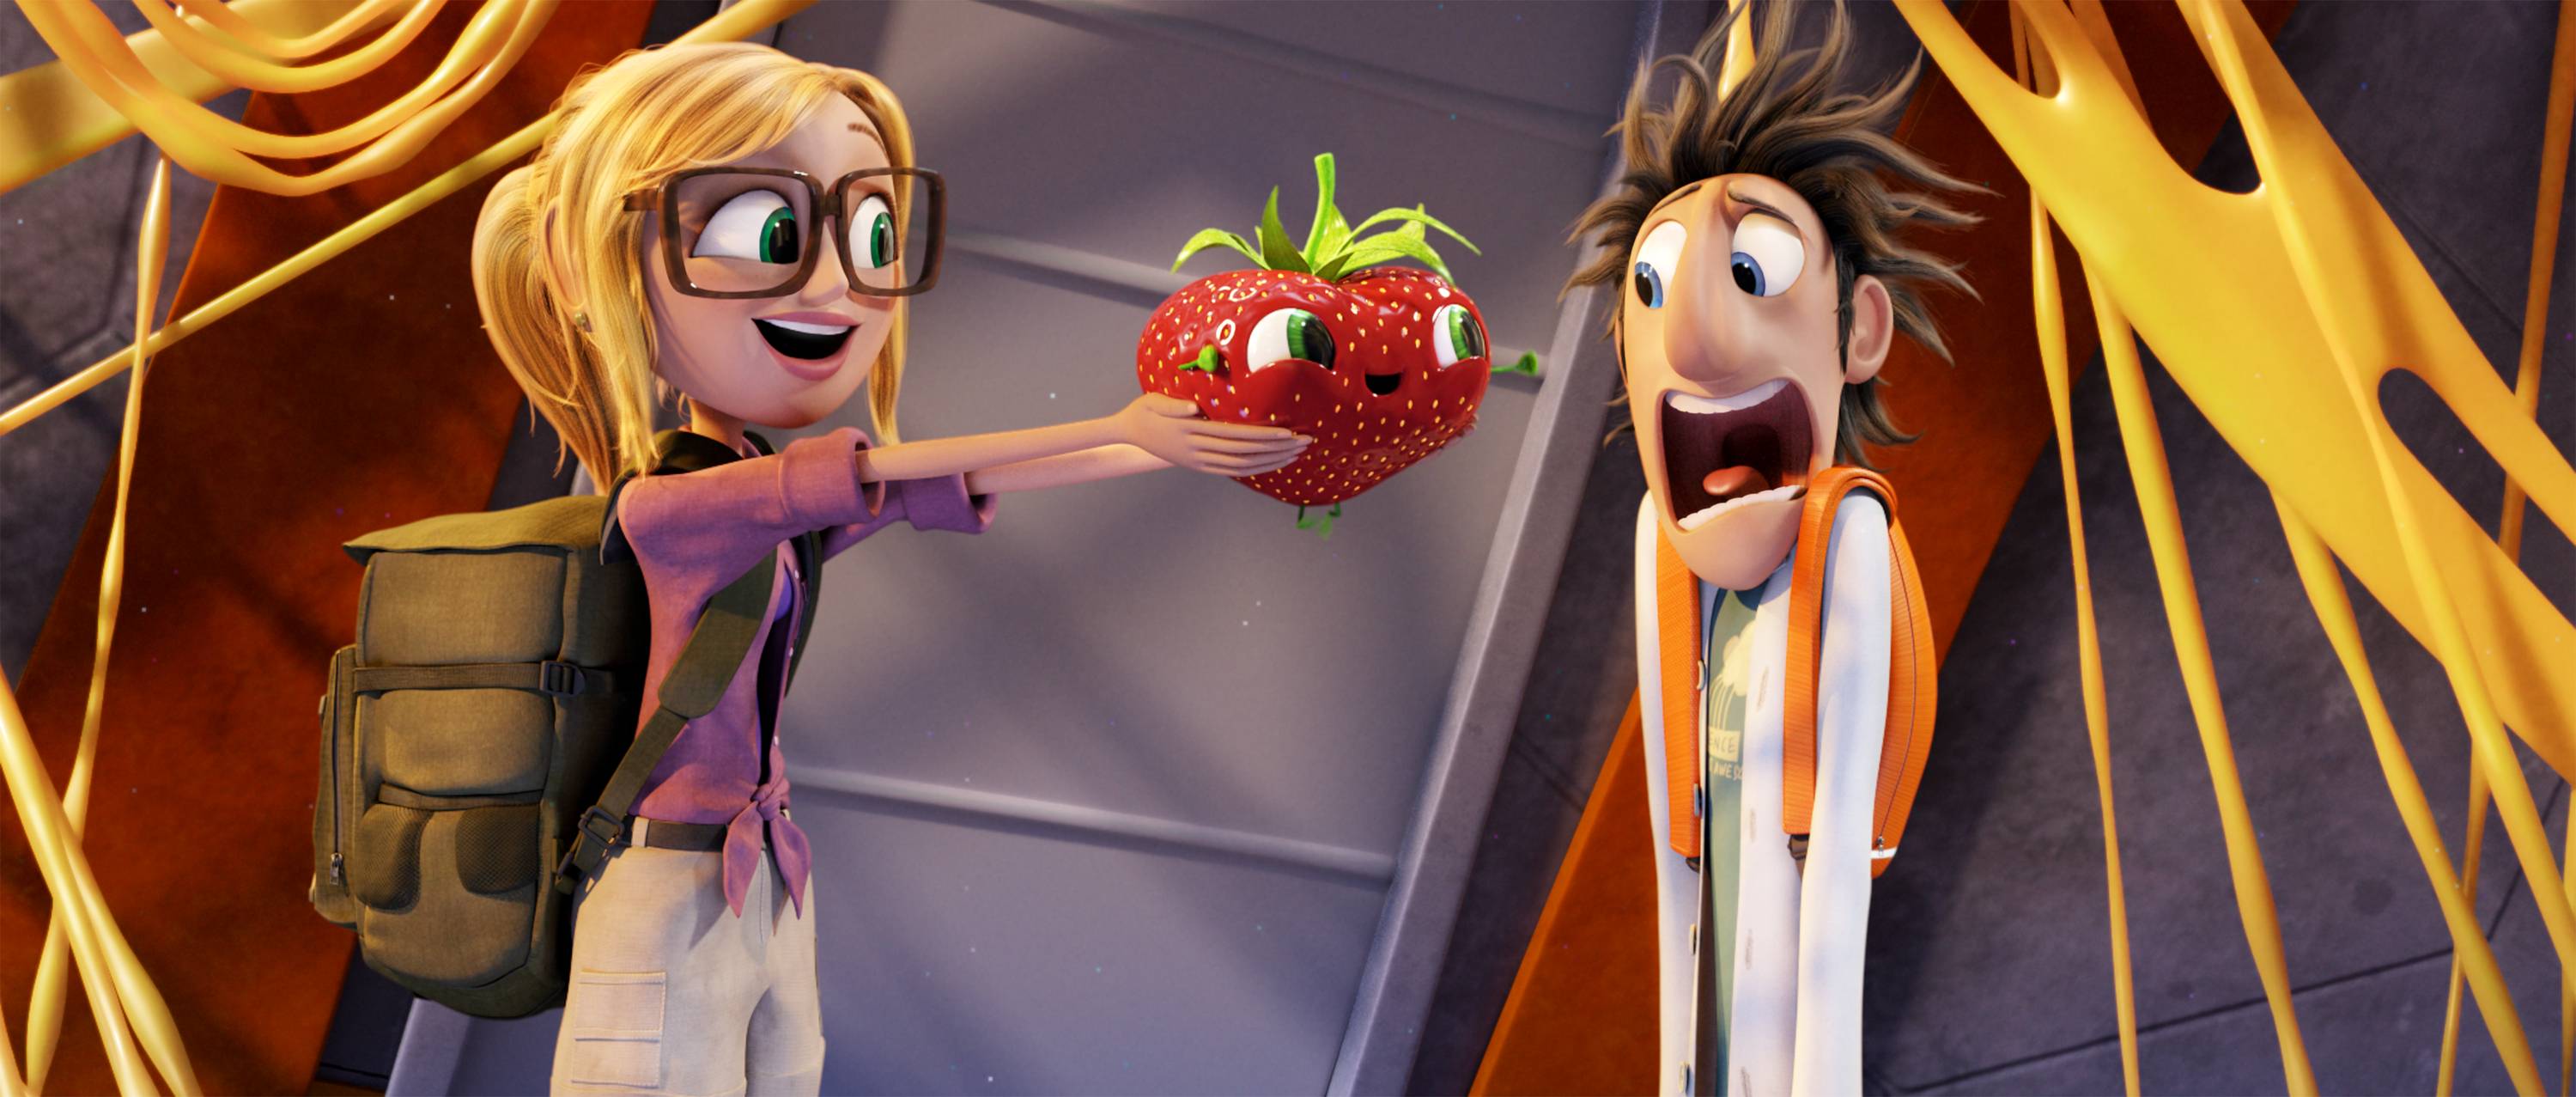 Wallpapers Cloudy with a Chance of Meatballs 2 cartoon family on the desktop